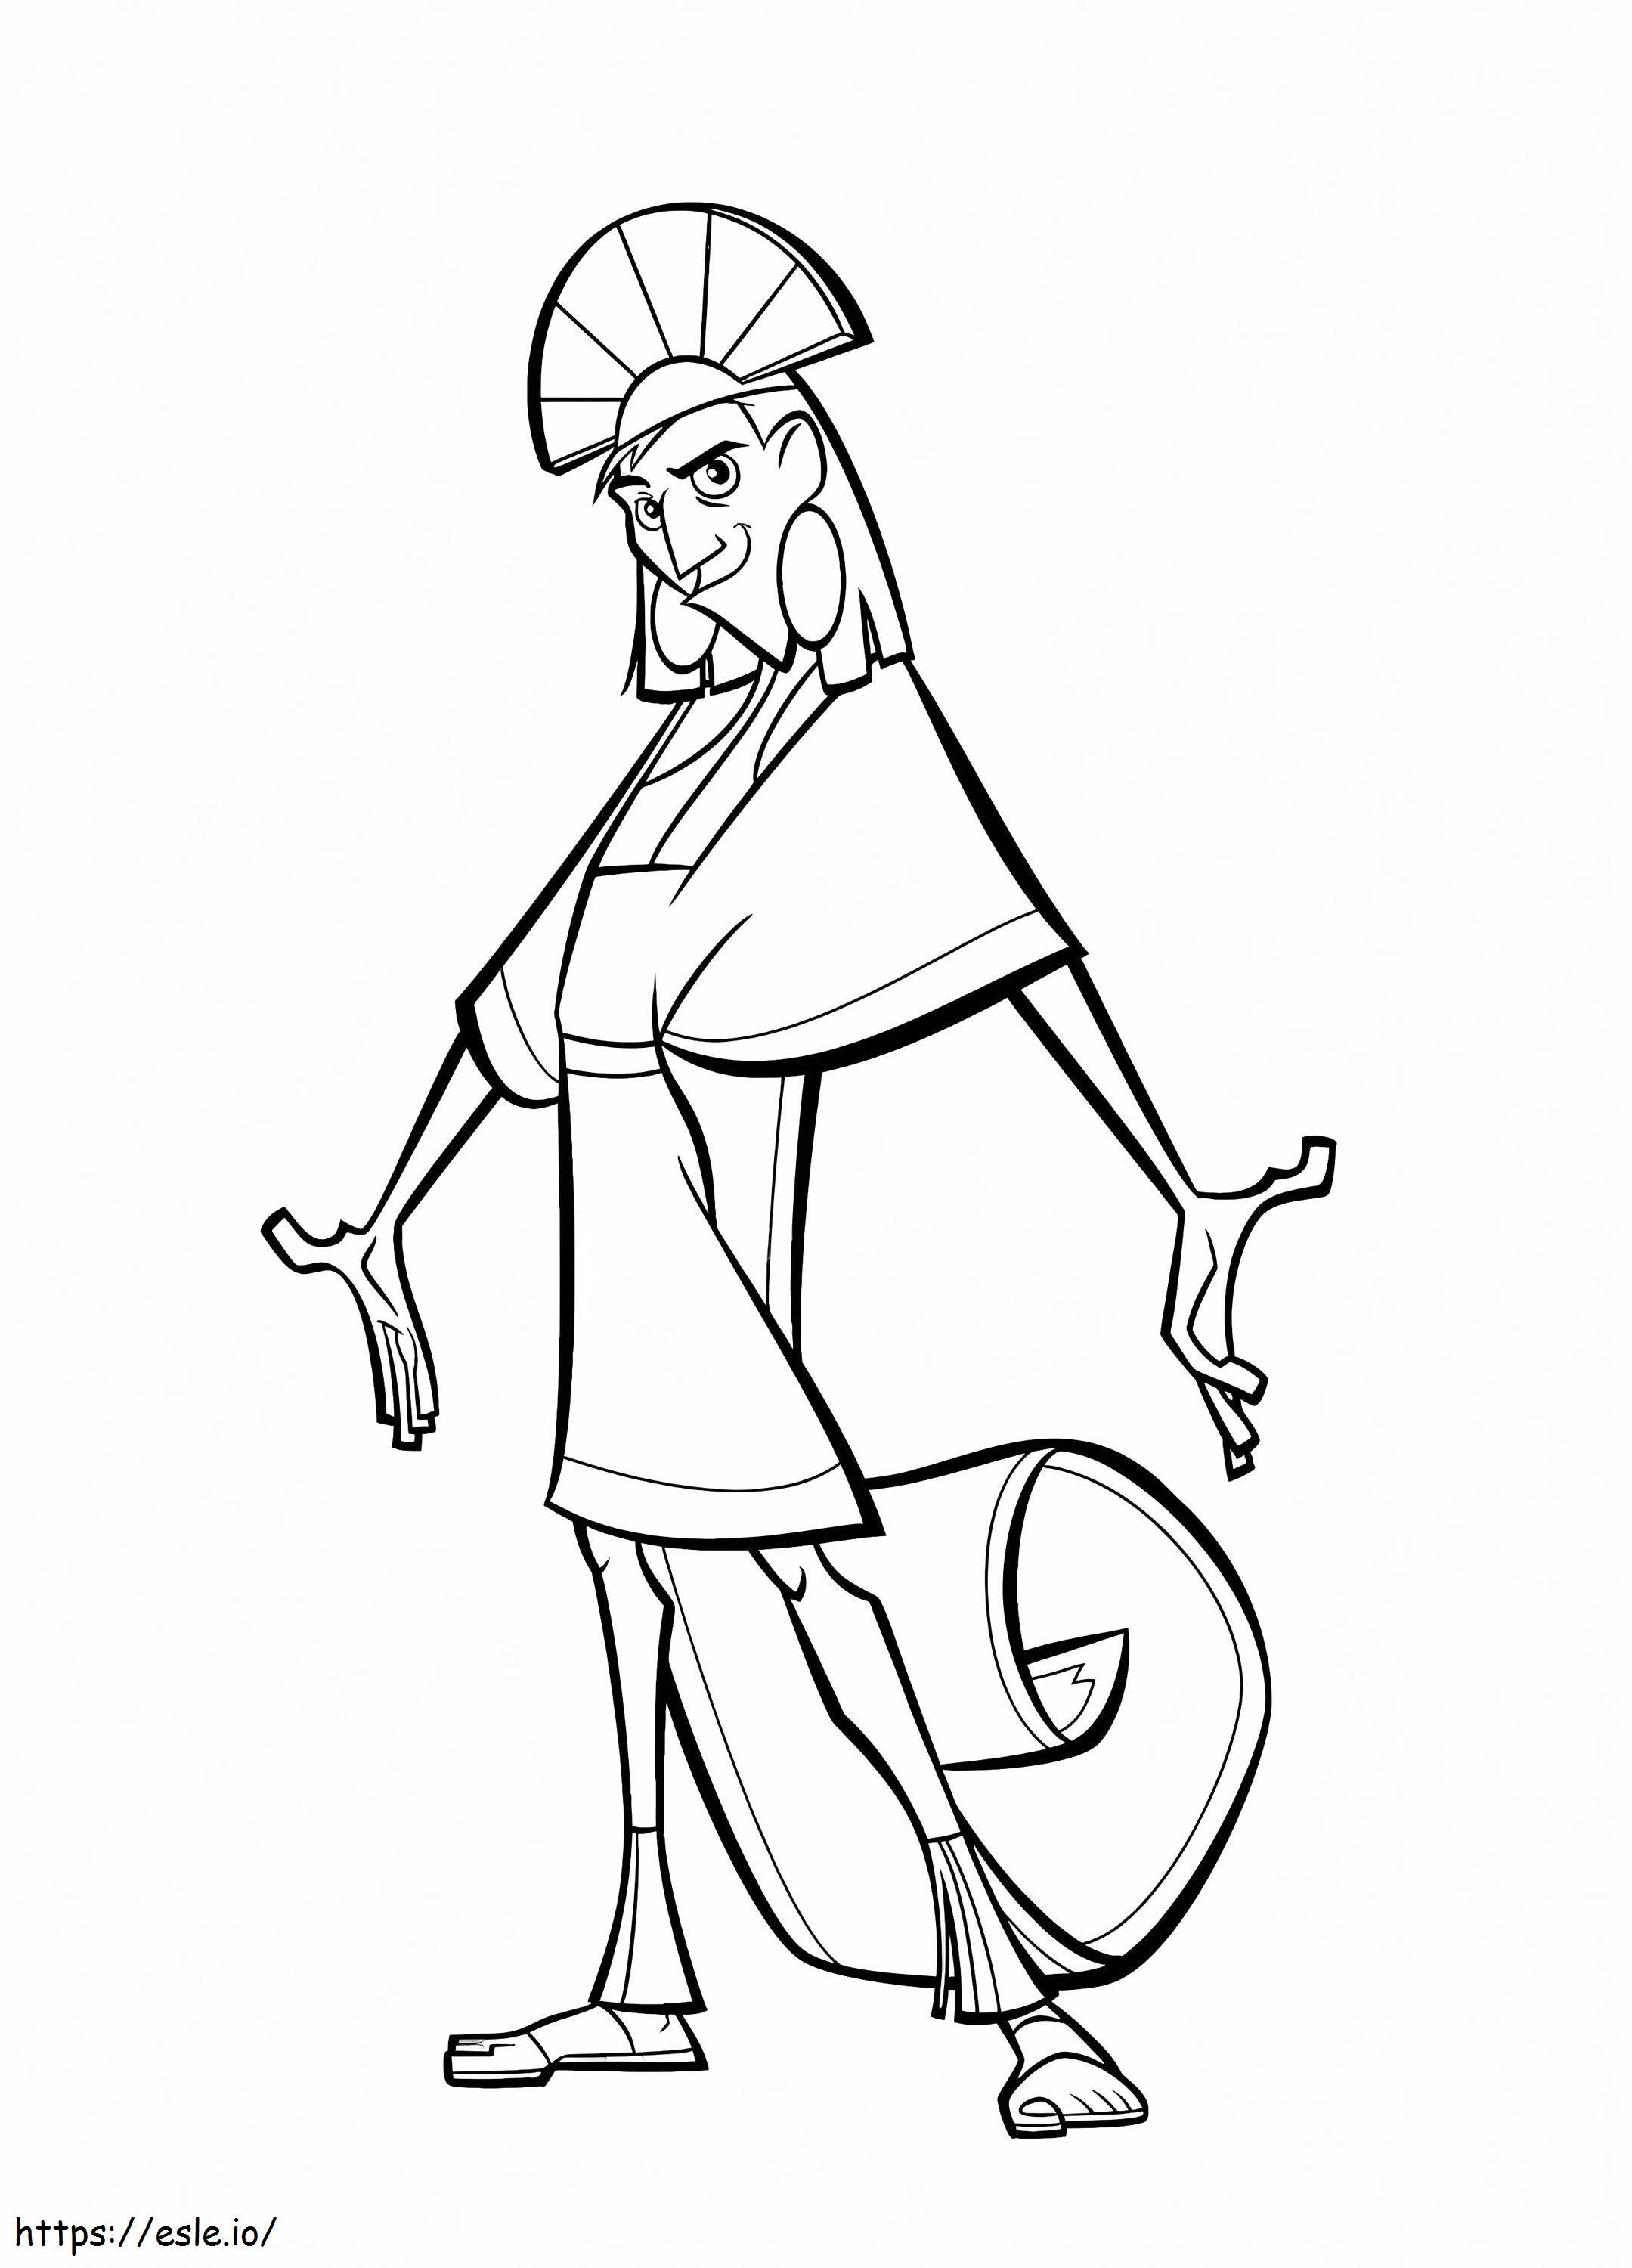 Kuzco From Emperors New Groove coloring page